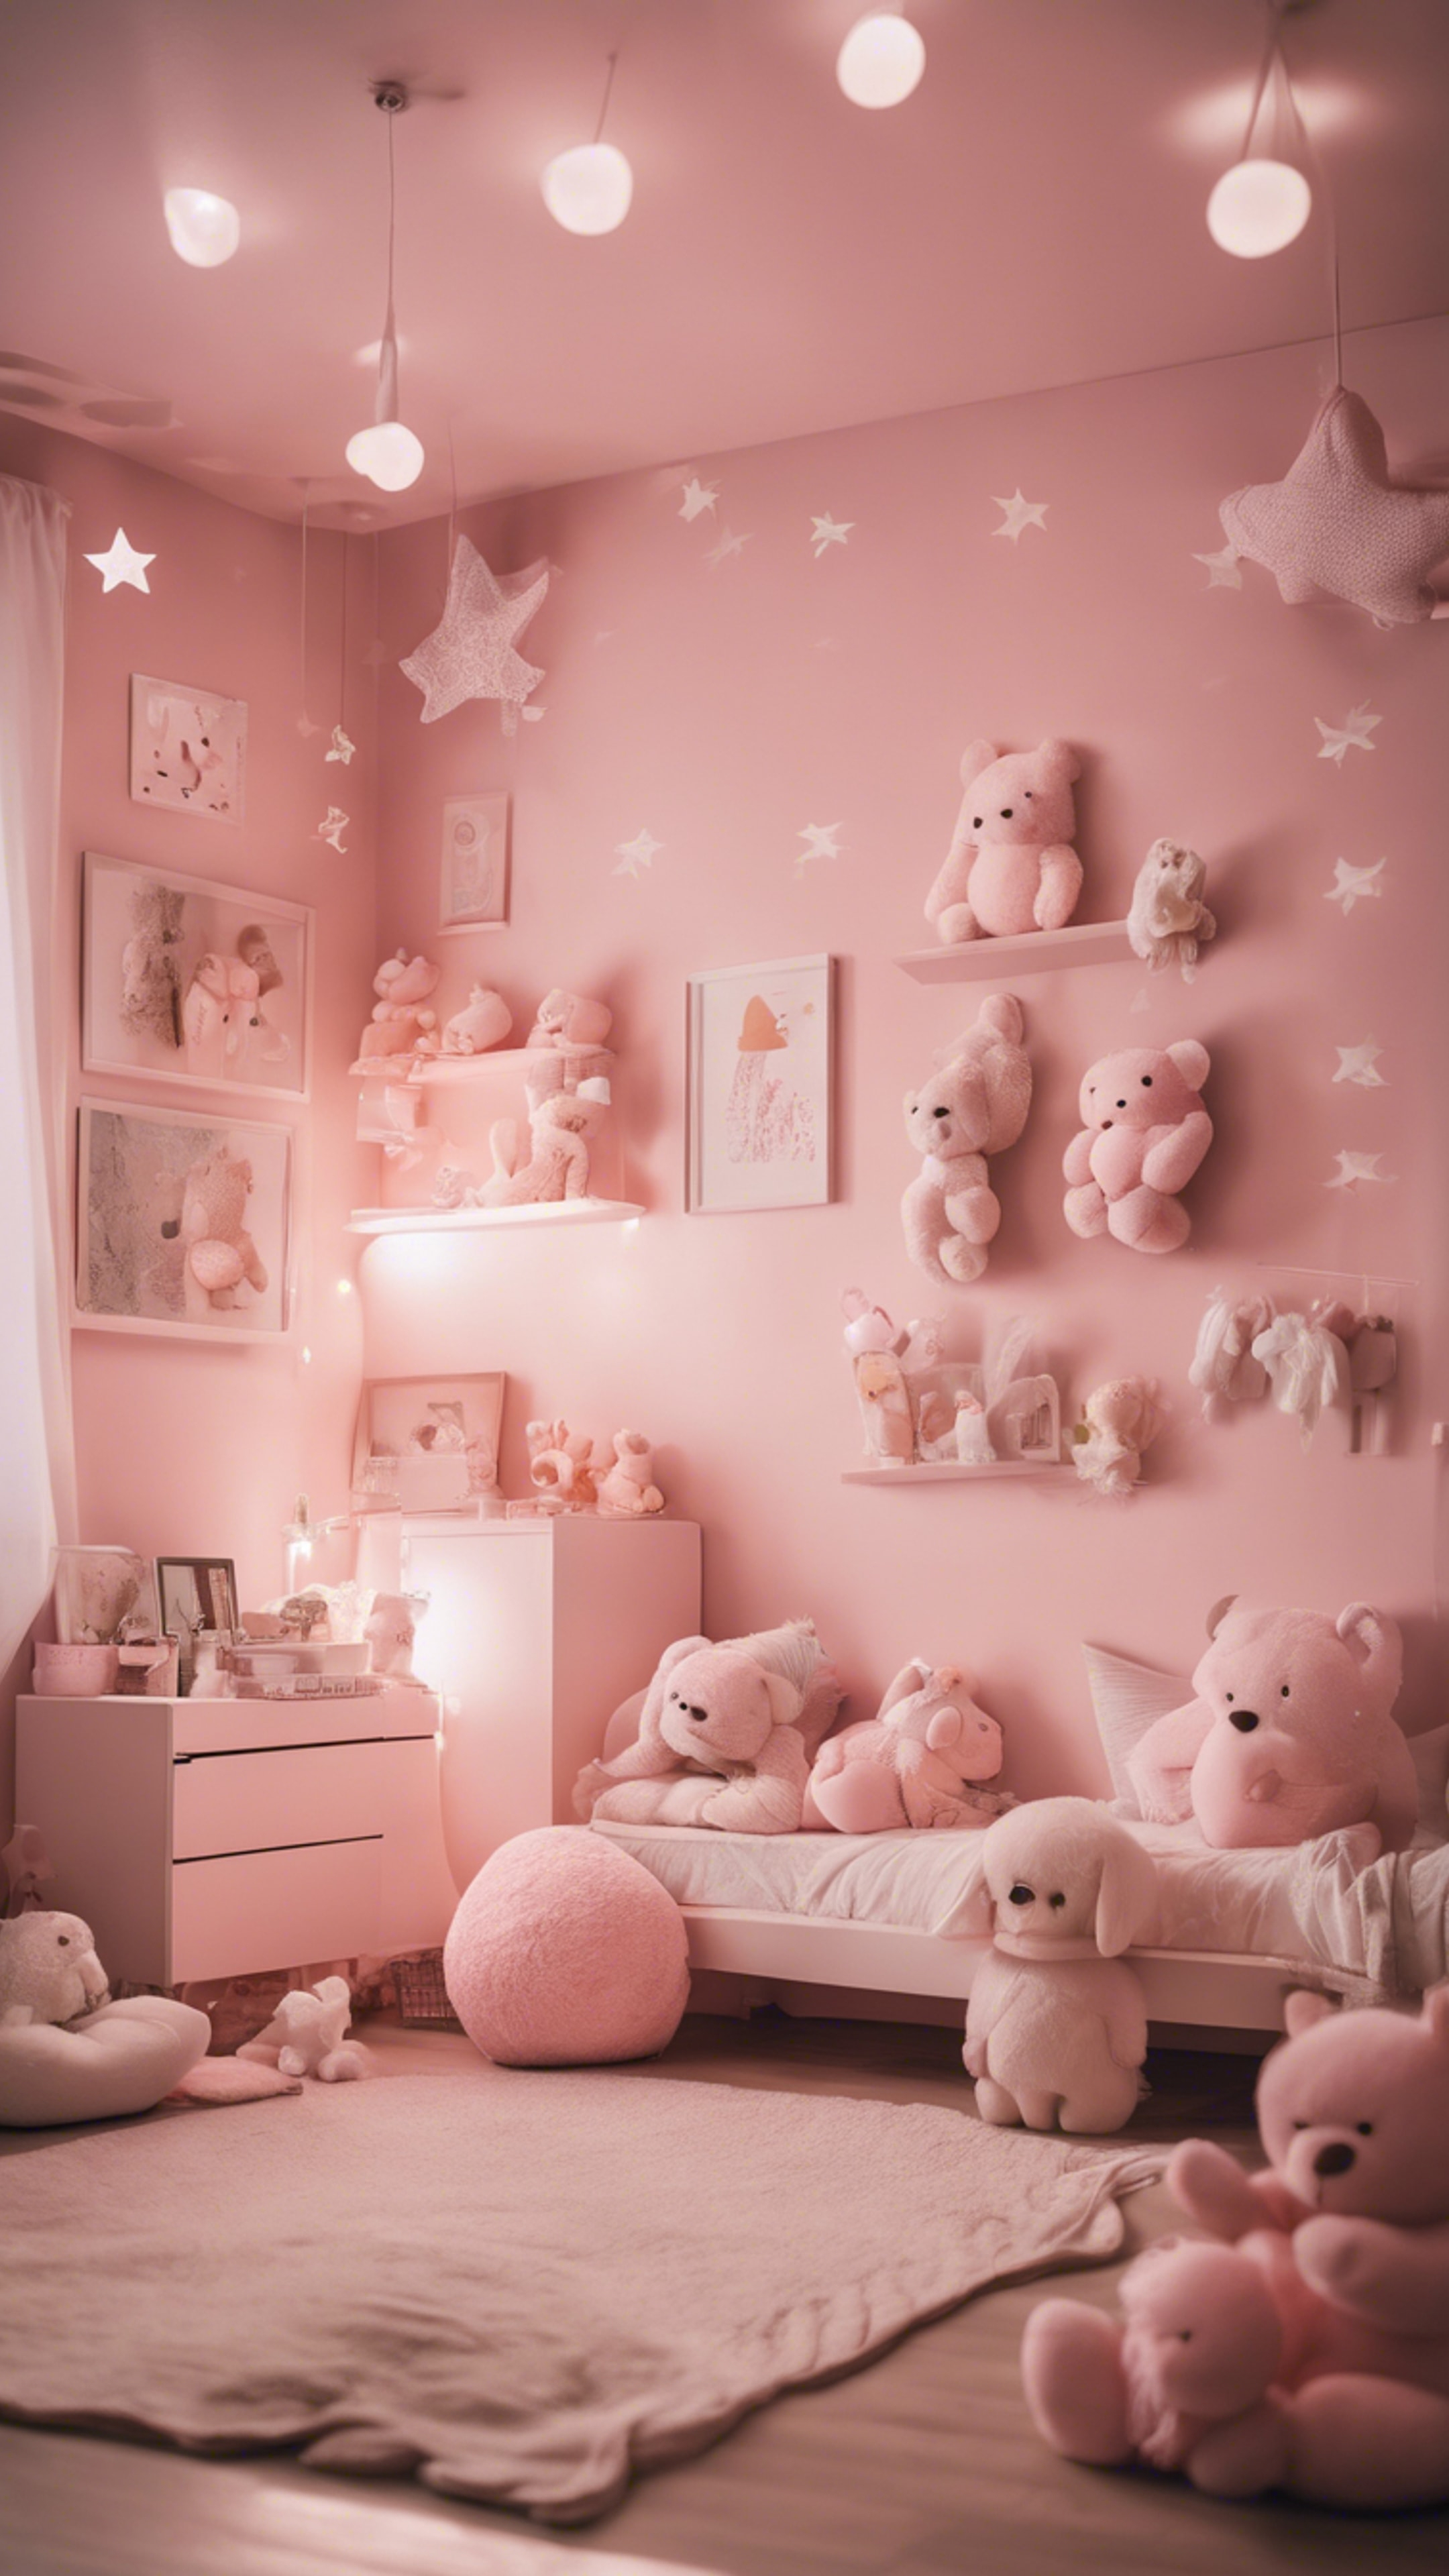 A child's bedroom designed in light pink Kawaii theme, with fluffy stuffed animals and stars. Hintergrund[1c682dae9a5849159ddf]